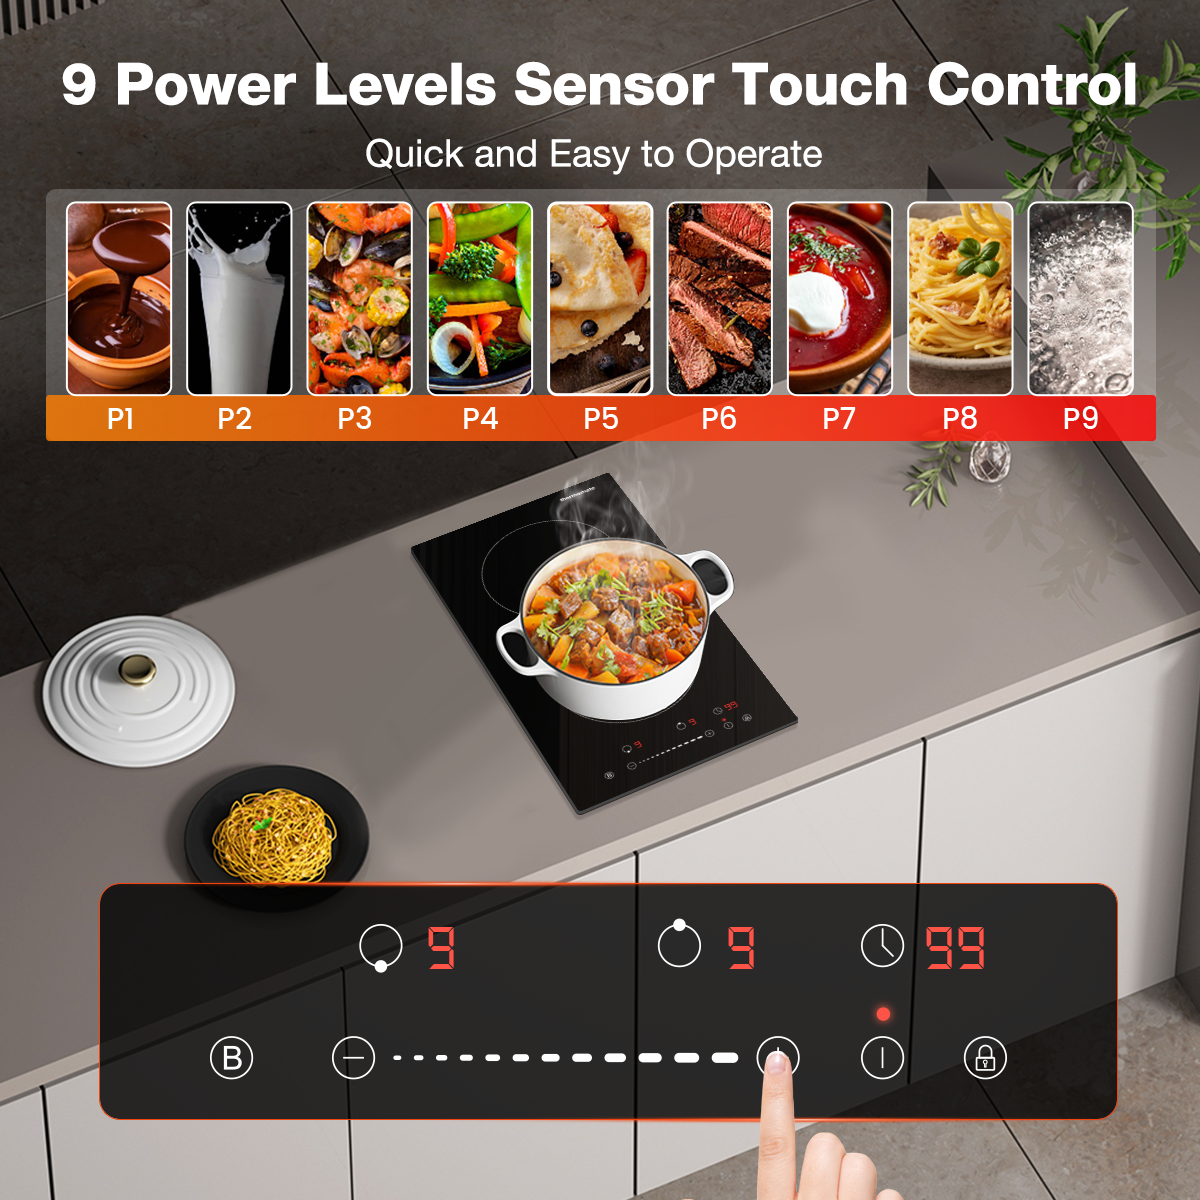 9 Power Levels Sensor Touch control | Thermomate